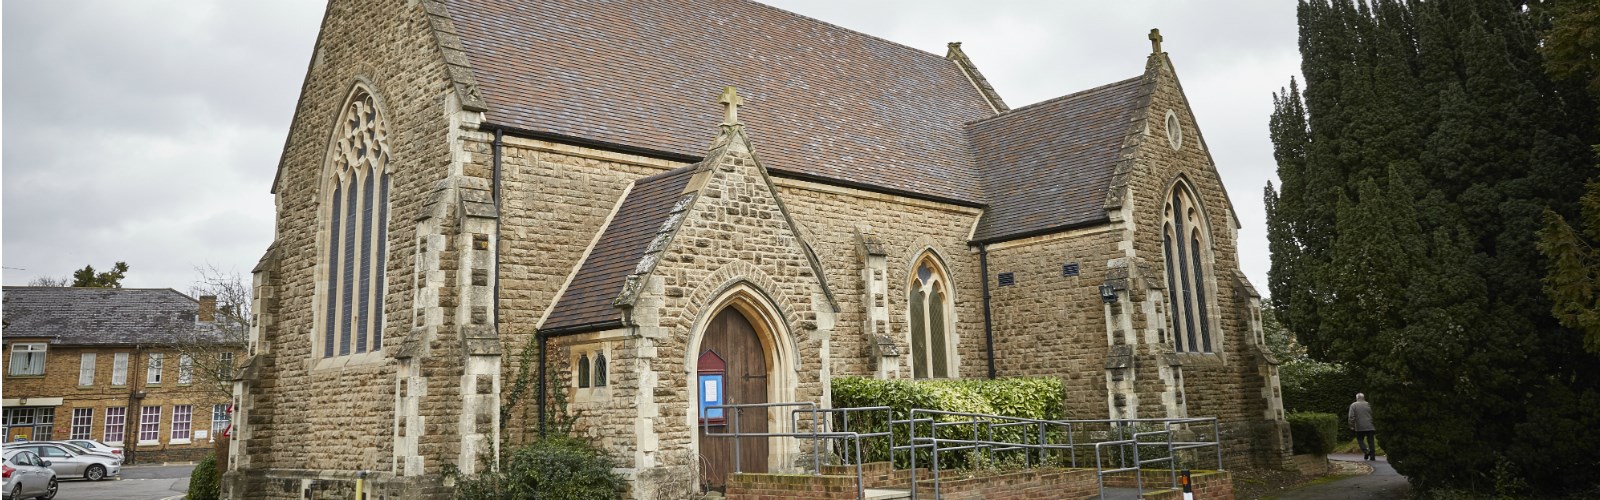 Image of our church St Mark's Hospital